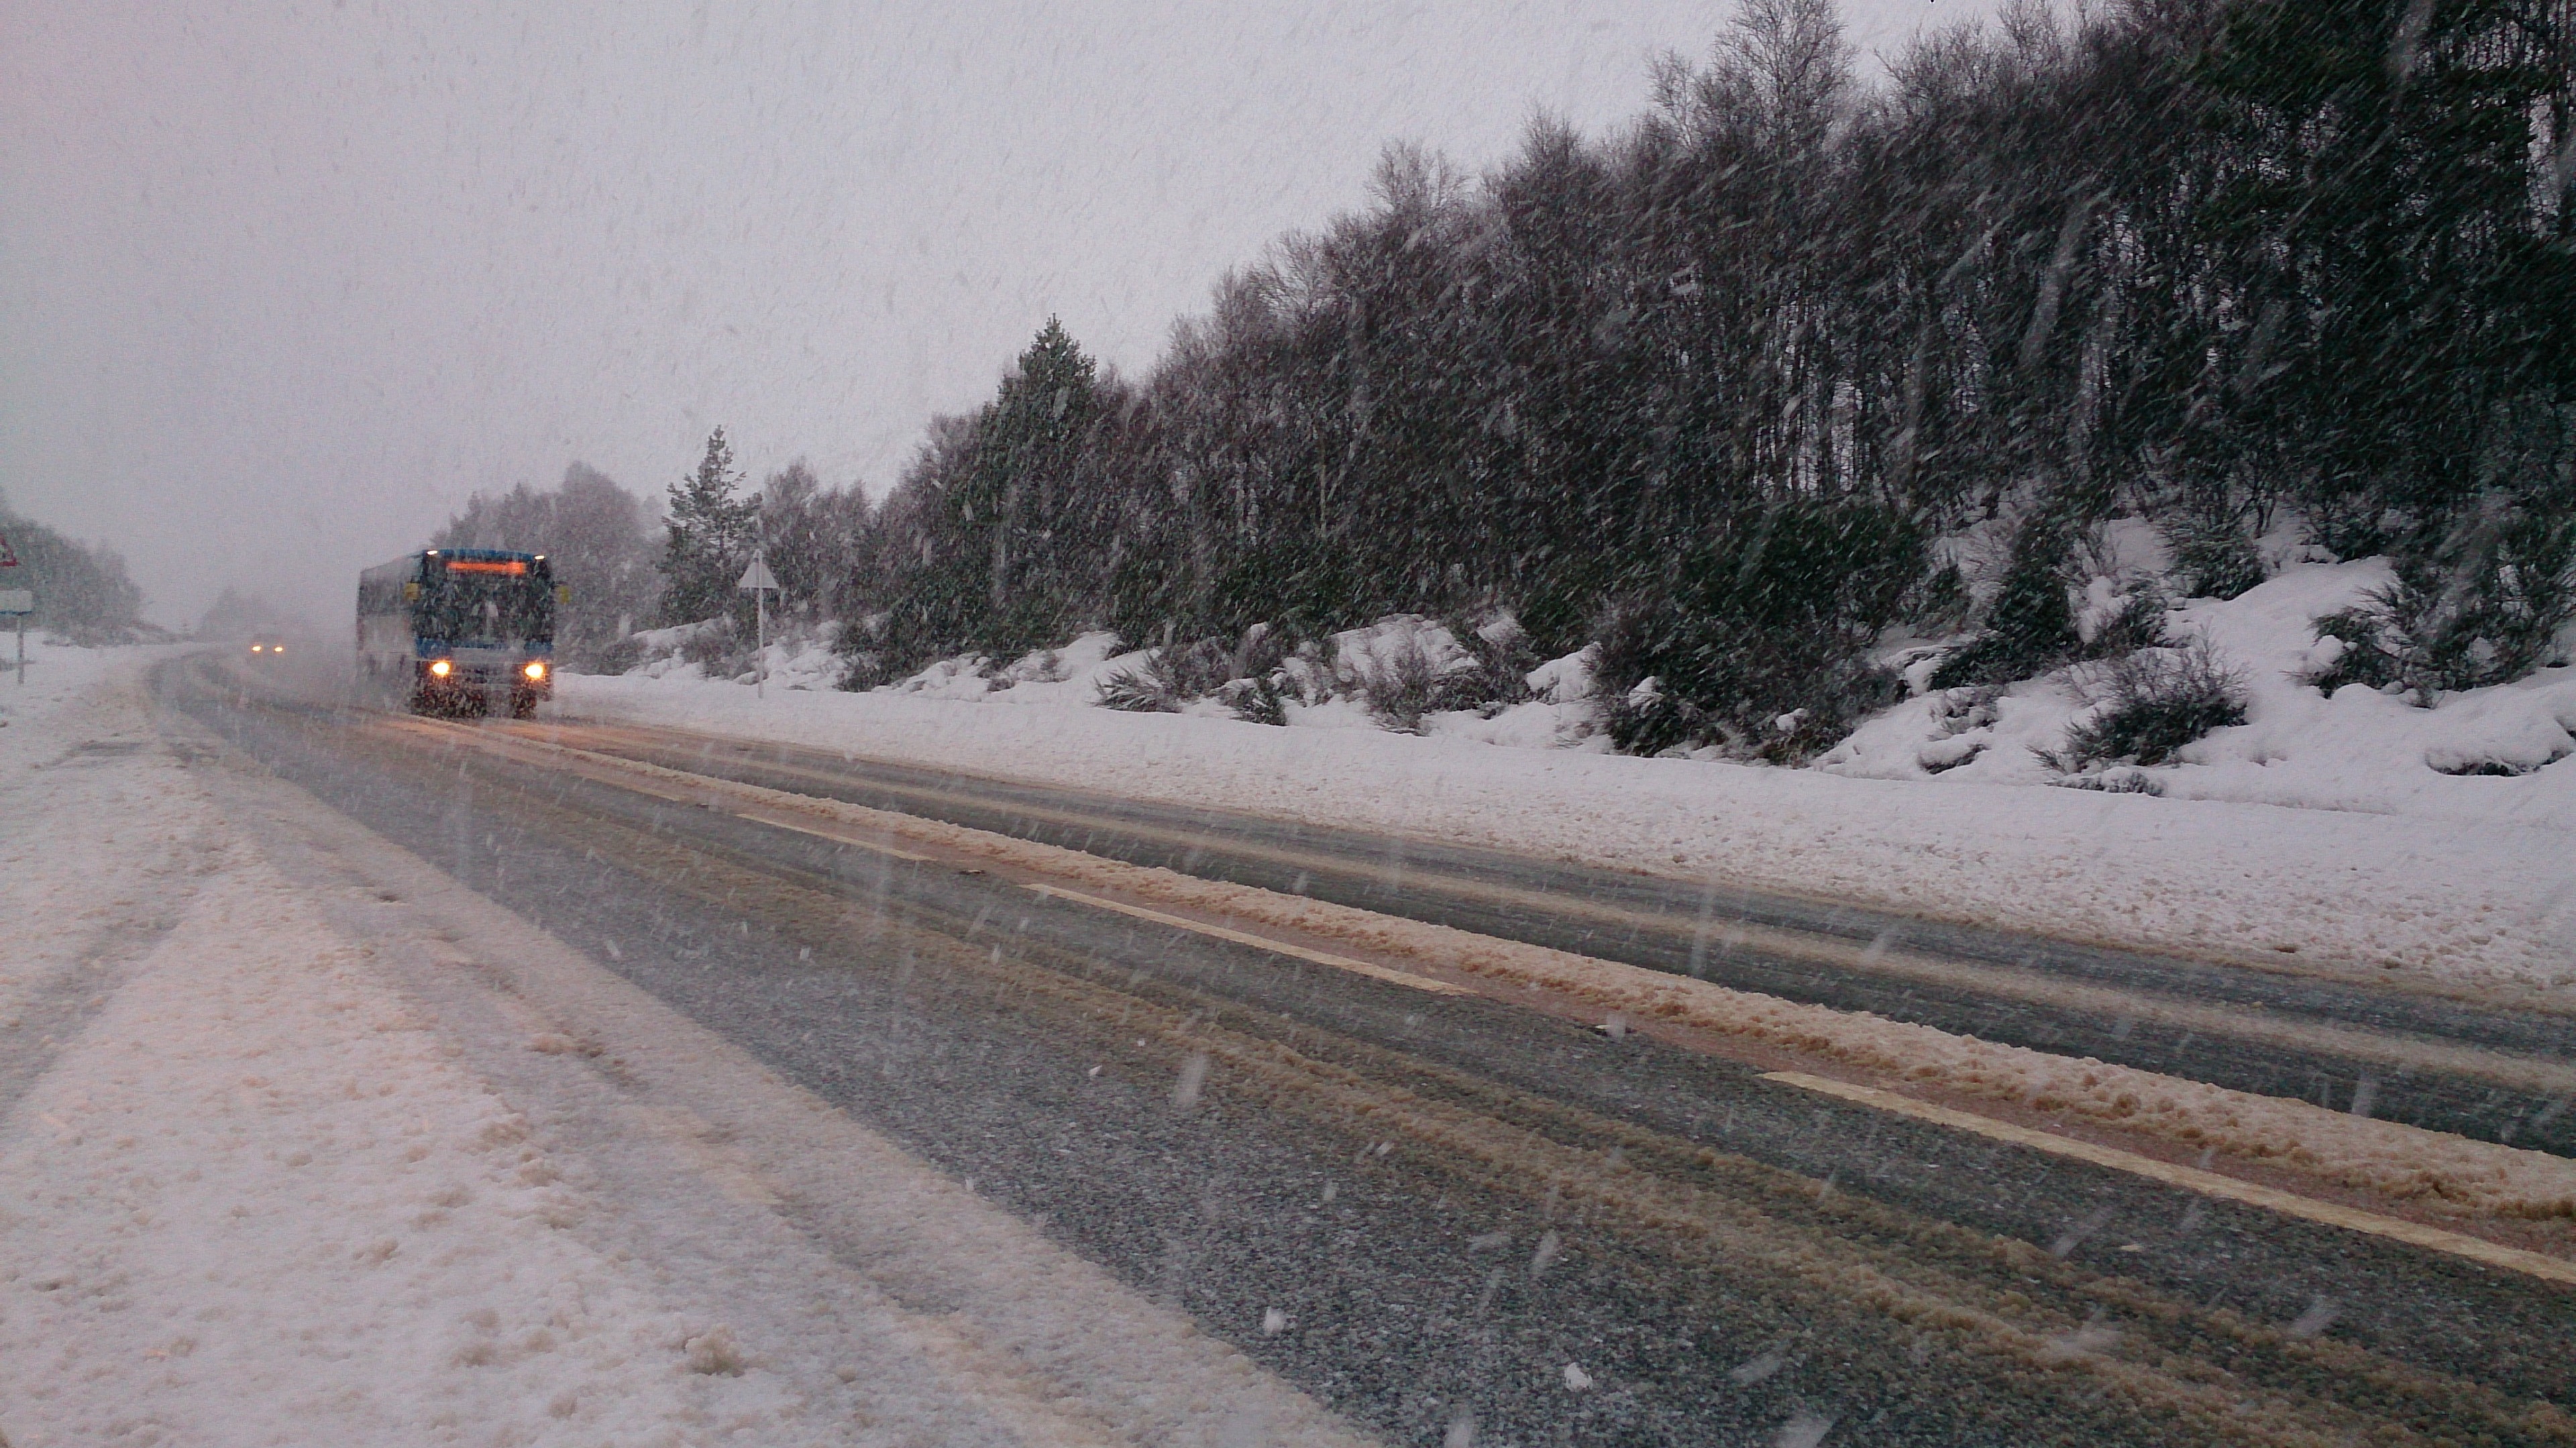 The scene on the A9 at Slochd earlier this morning